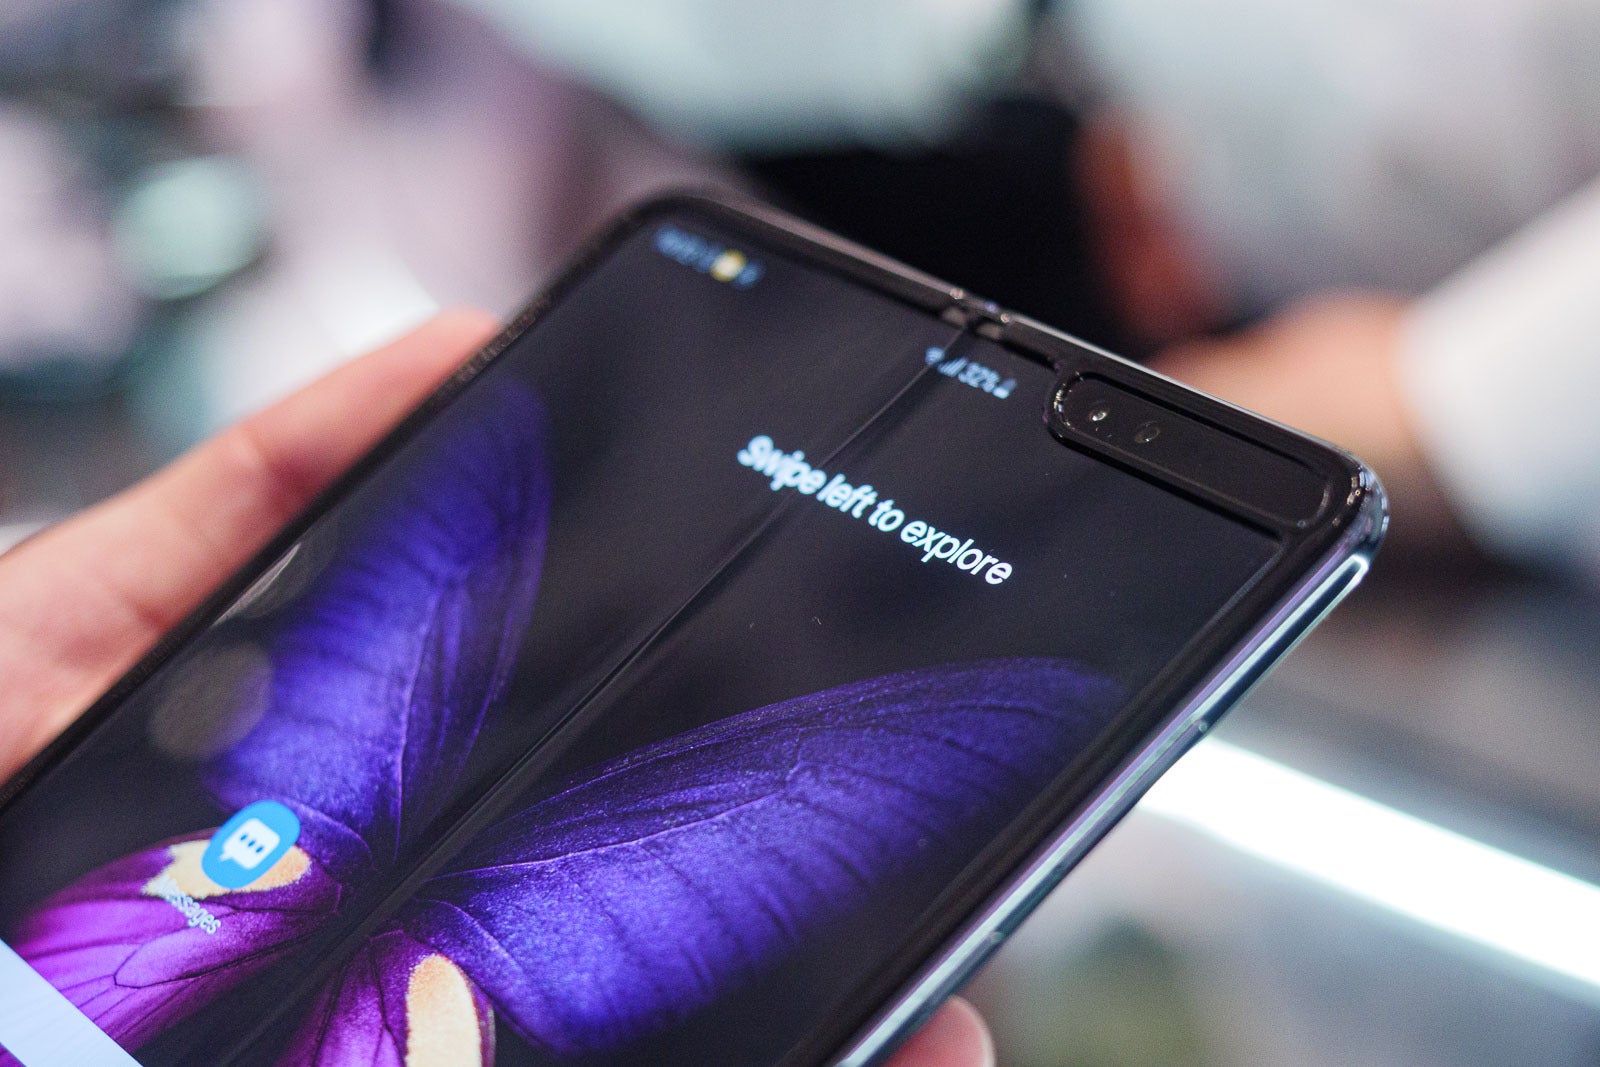 The Galaxy Fold's successor (not the Galaxy Z Flip) could debut before summer